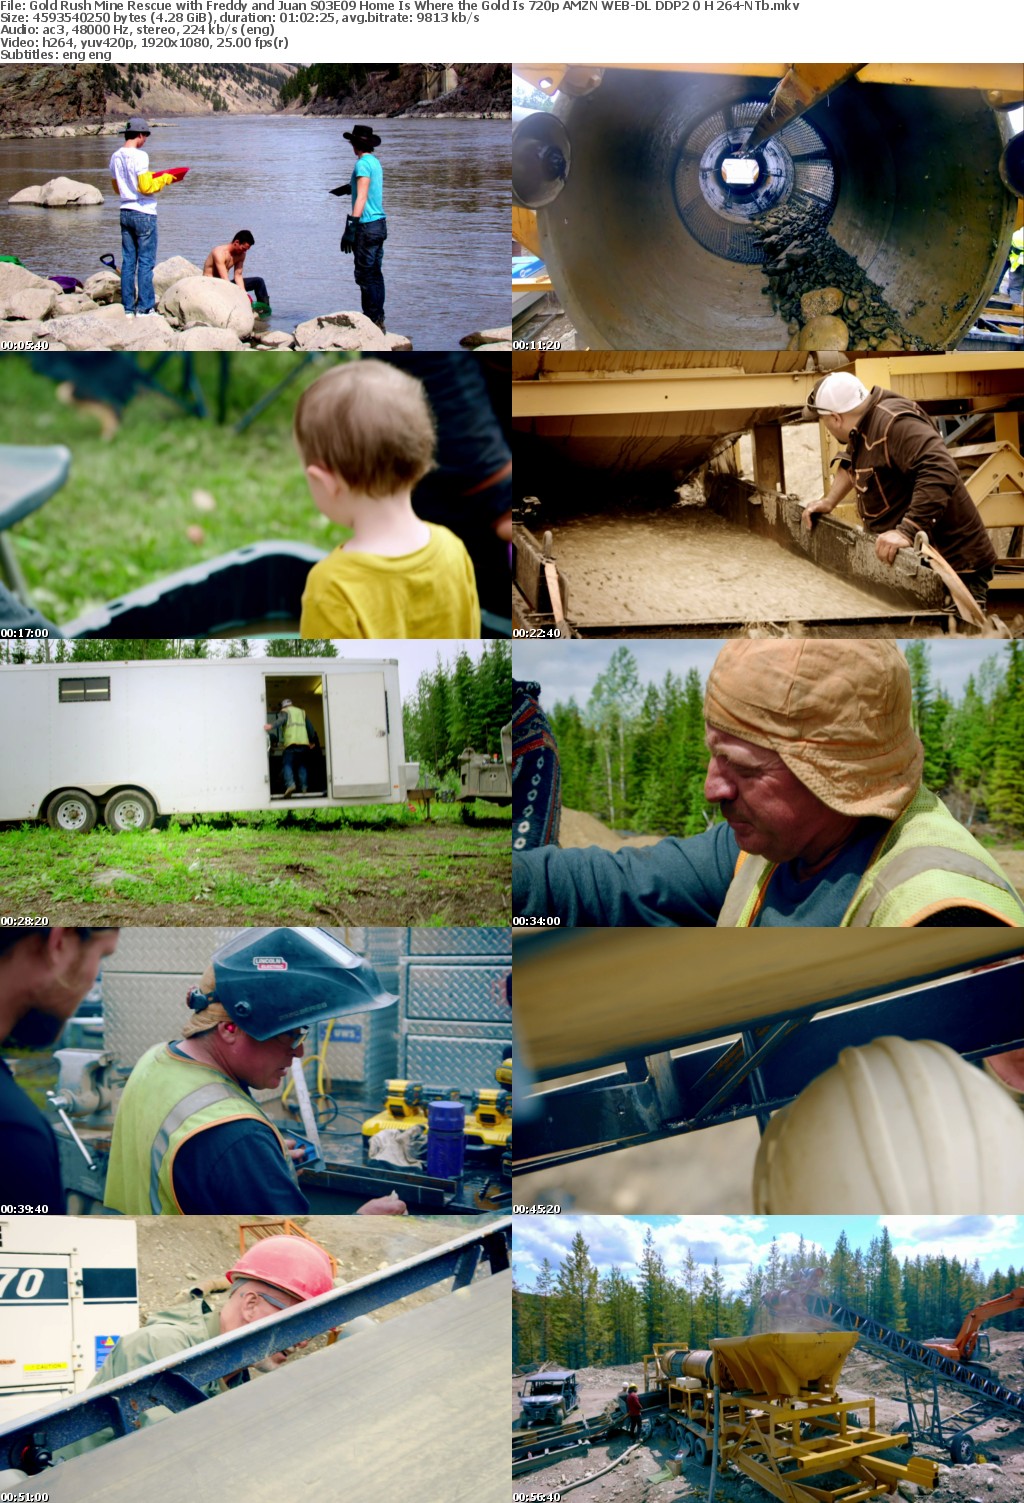 Gold Rush Mine Rescue with Freddy and Juan S03E09 Home Is Where the Gold Is 720p AMZN WEB-DL DDP2 0 H 264-NTb